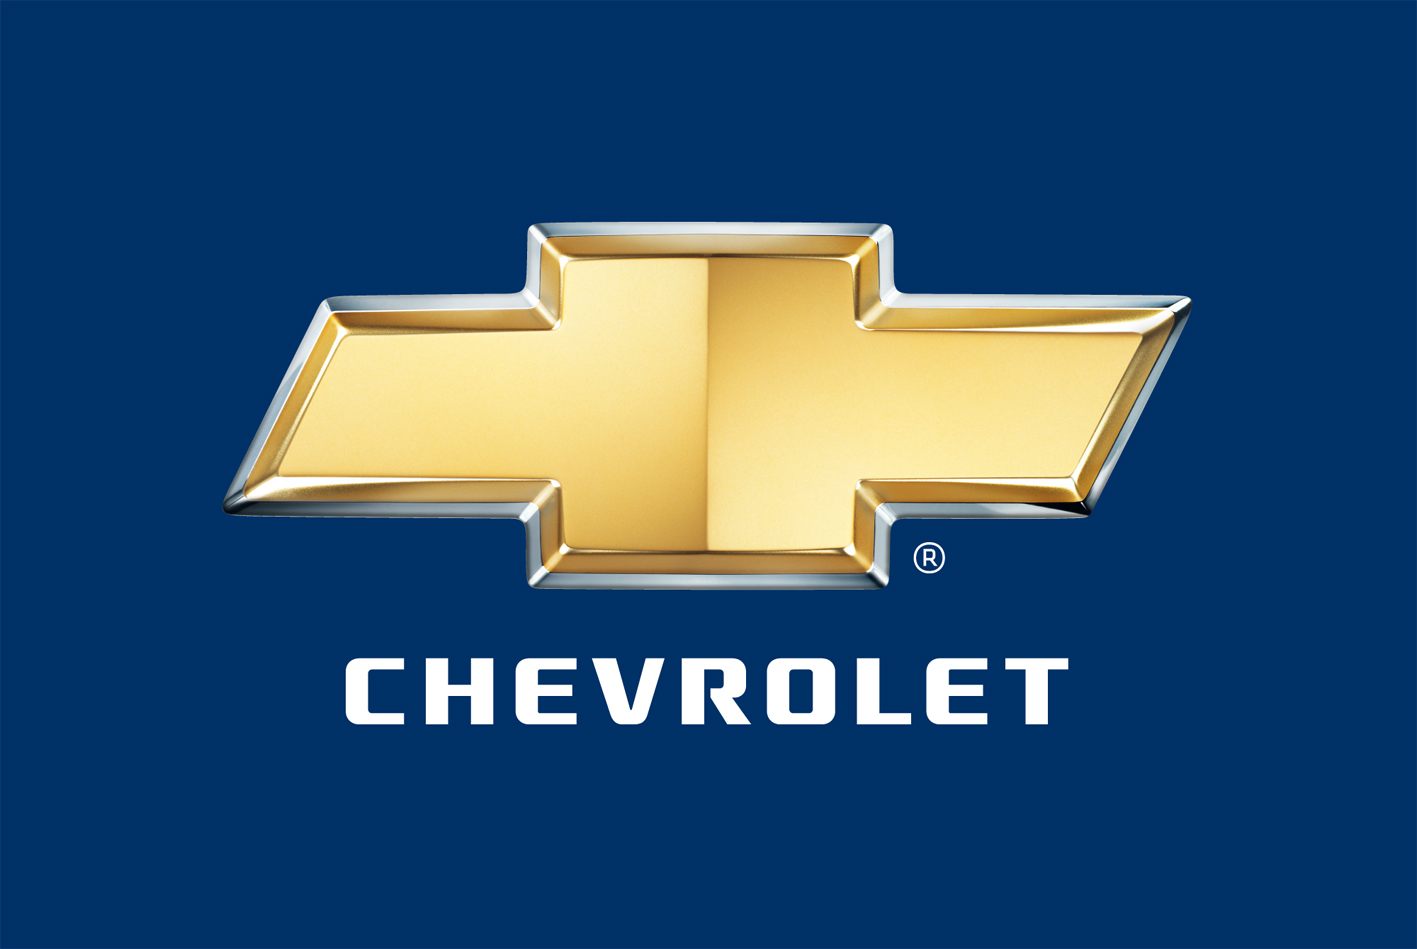 Chevy logo chevrolet car symbol meaning and history brand jpg 2